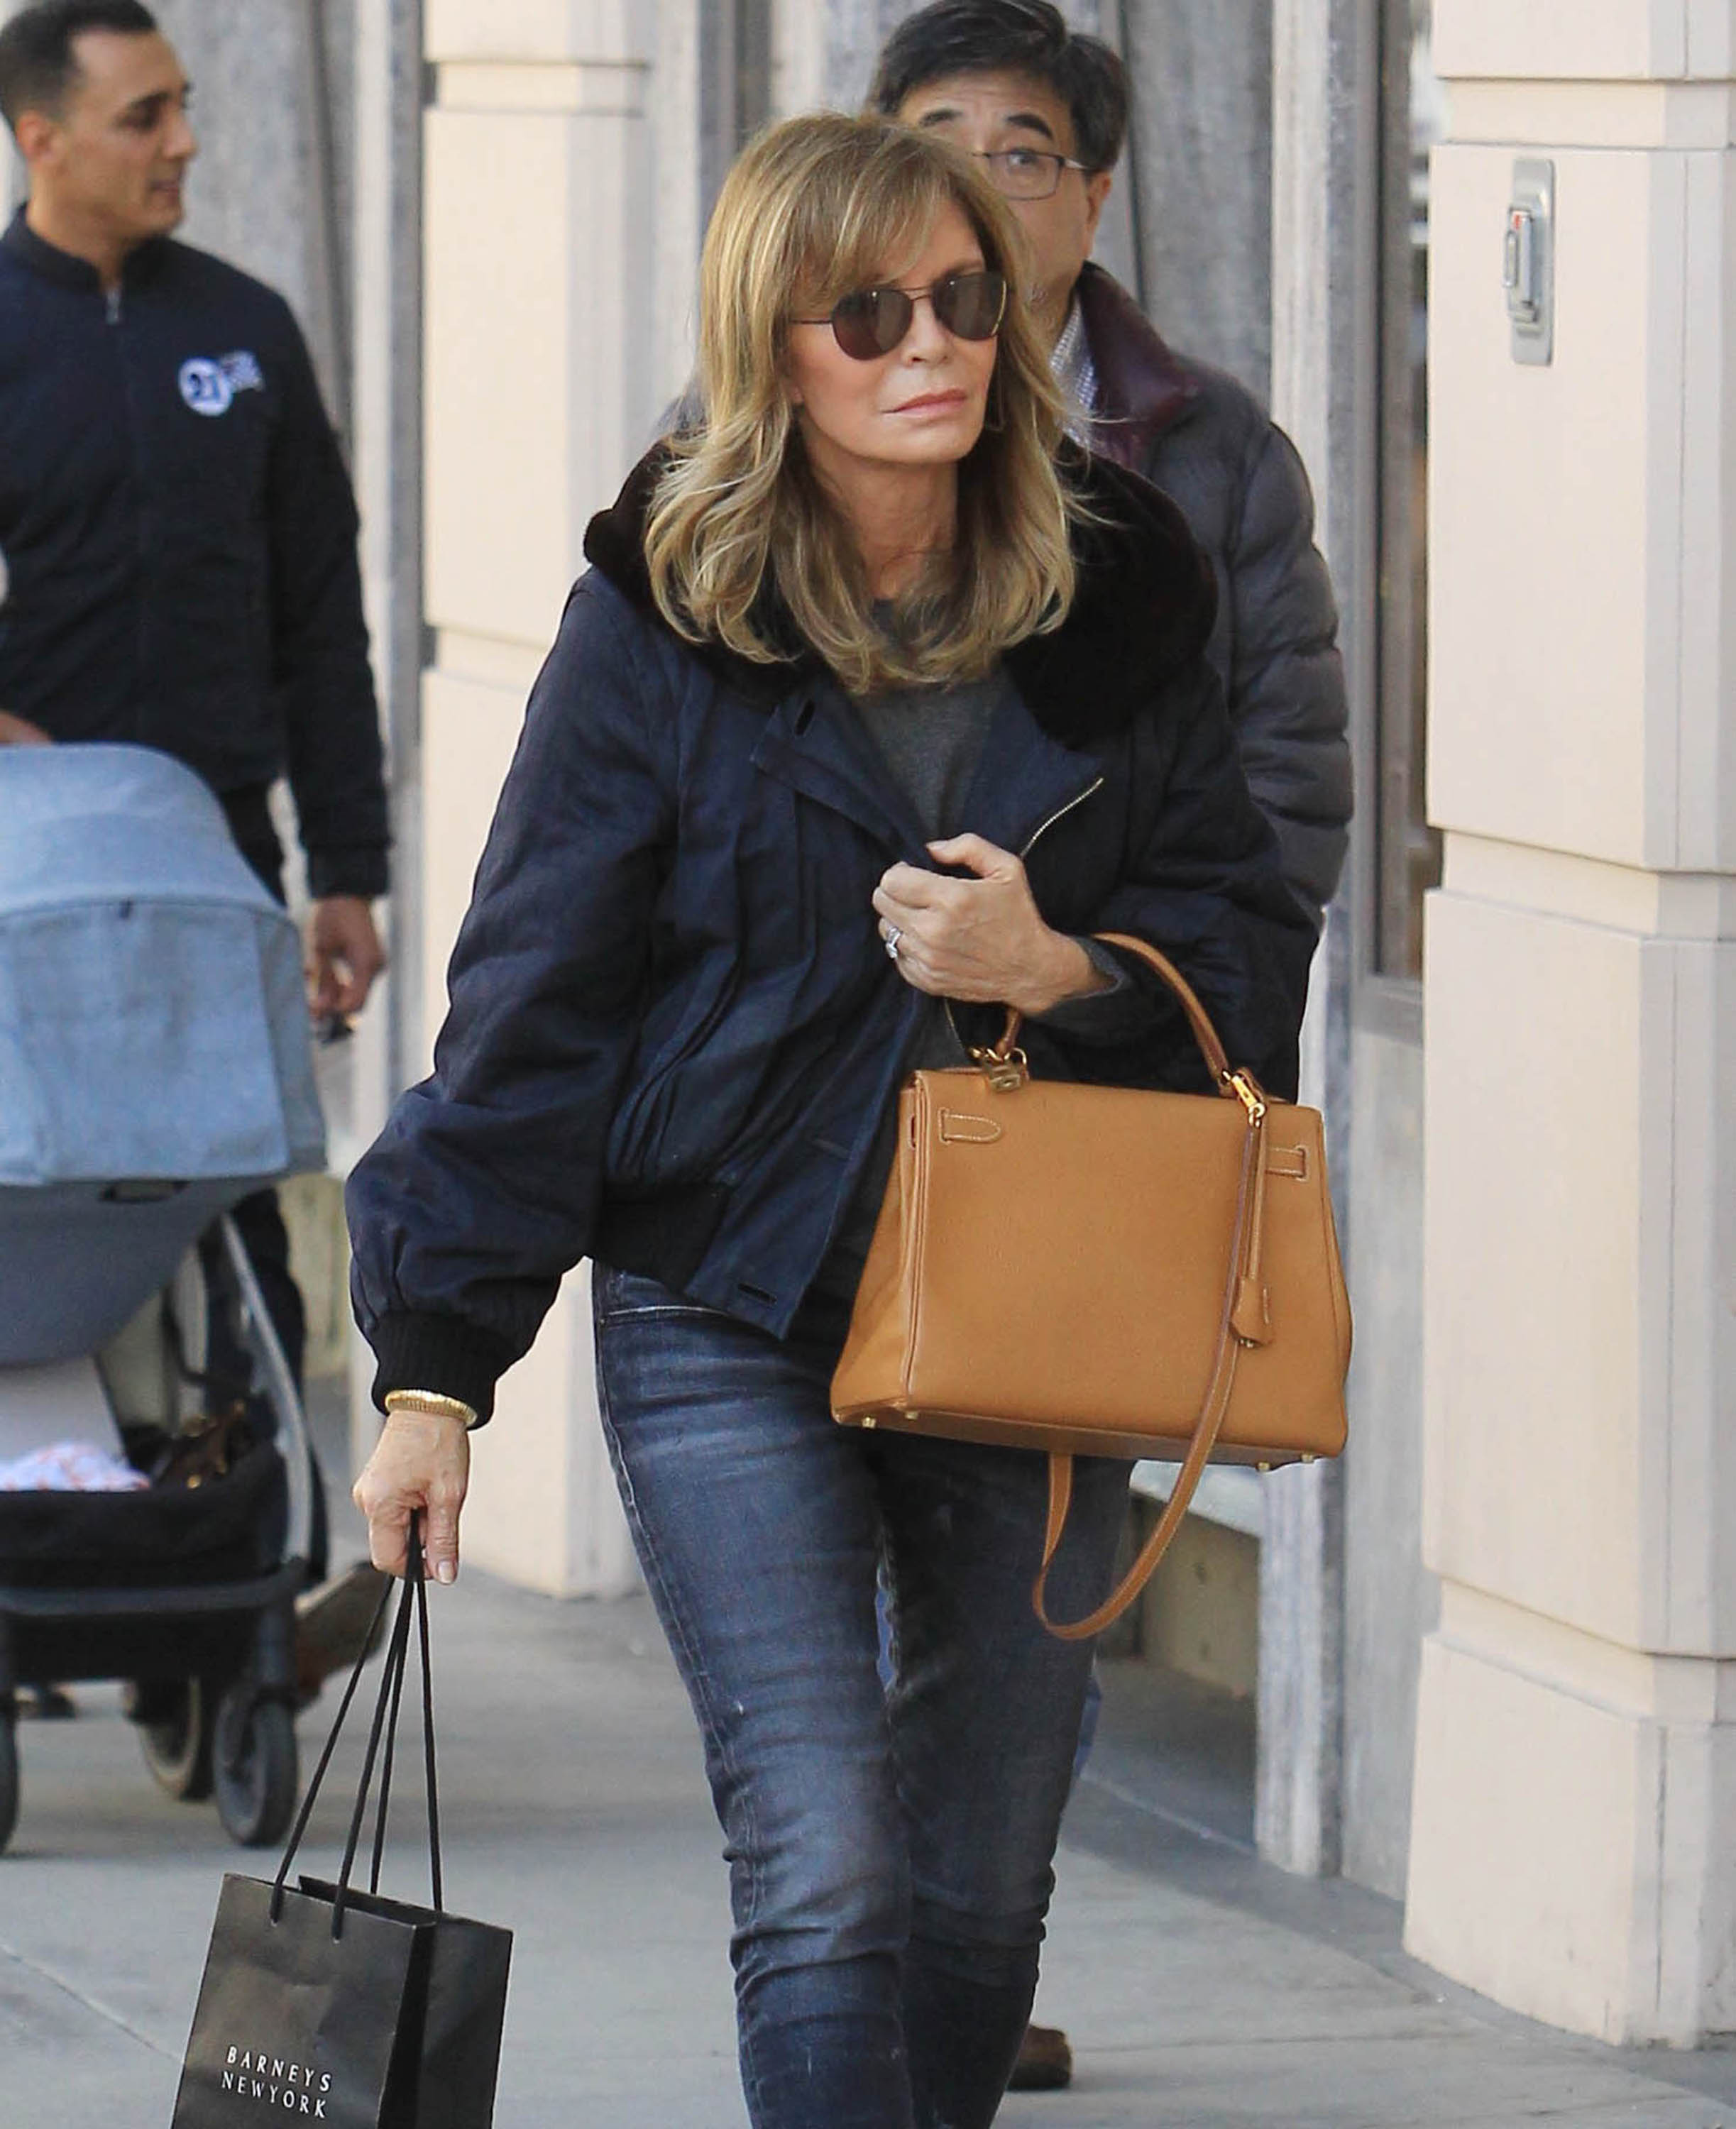 Jaclyn Smith spotted in Los Angeles, California on January 18, 2019 | Source: Getty Images